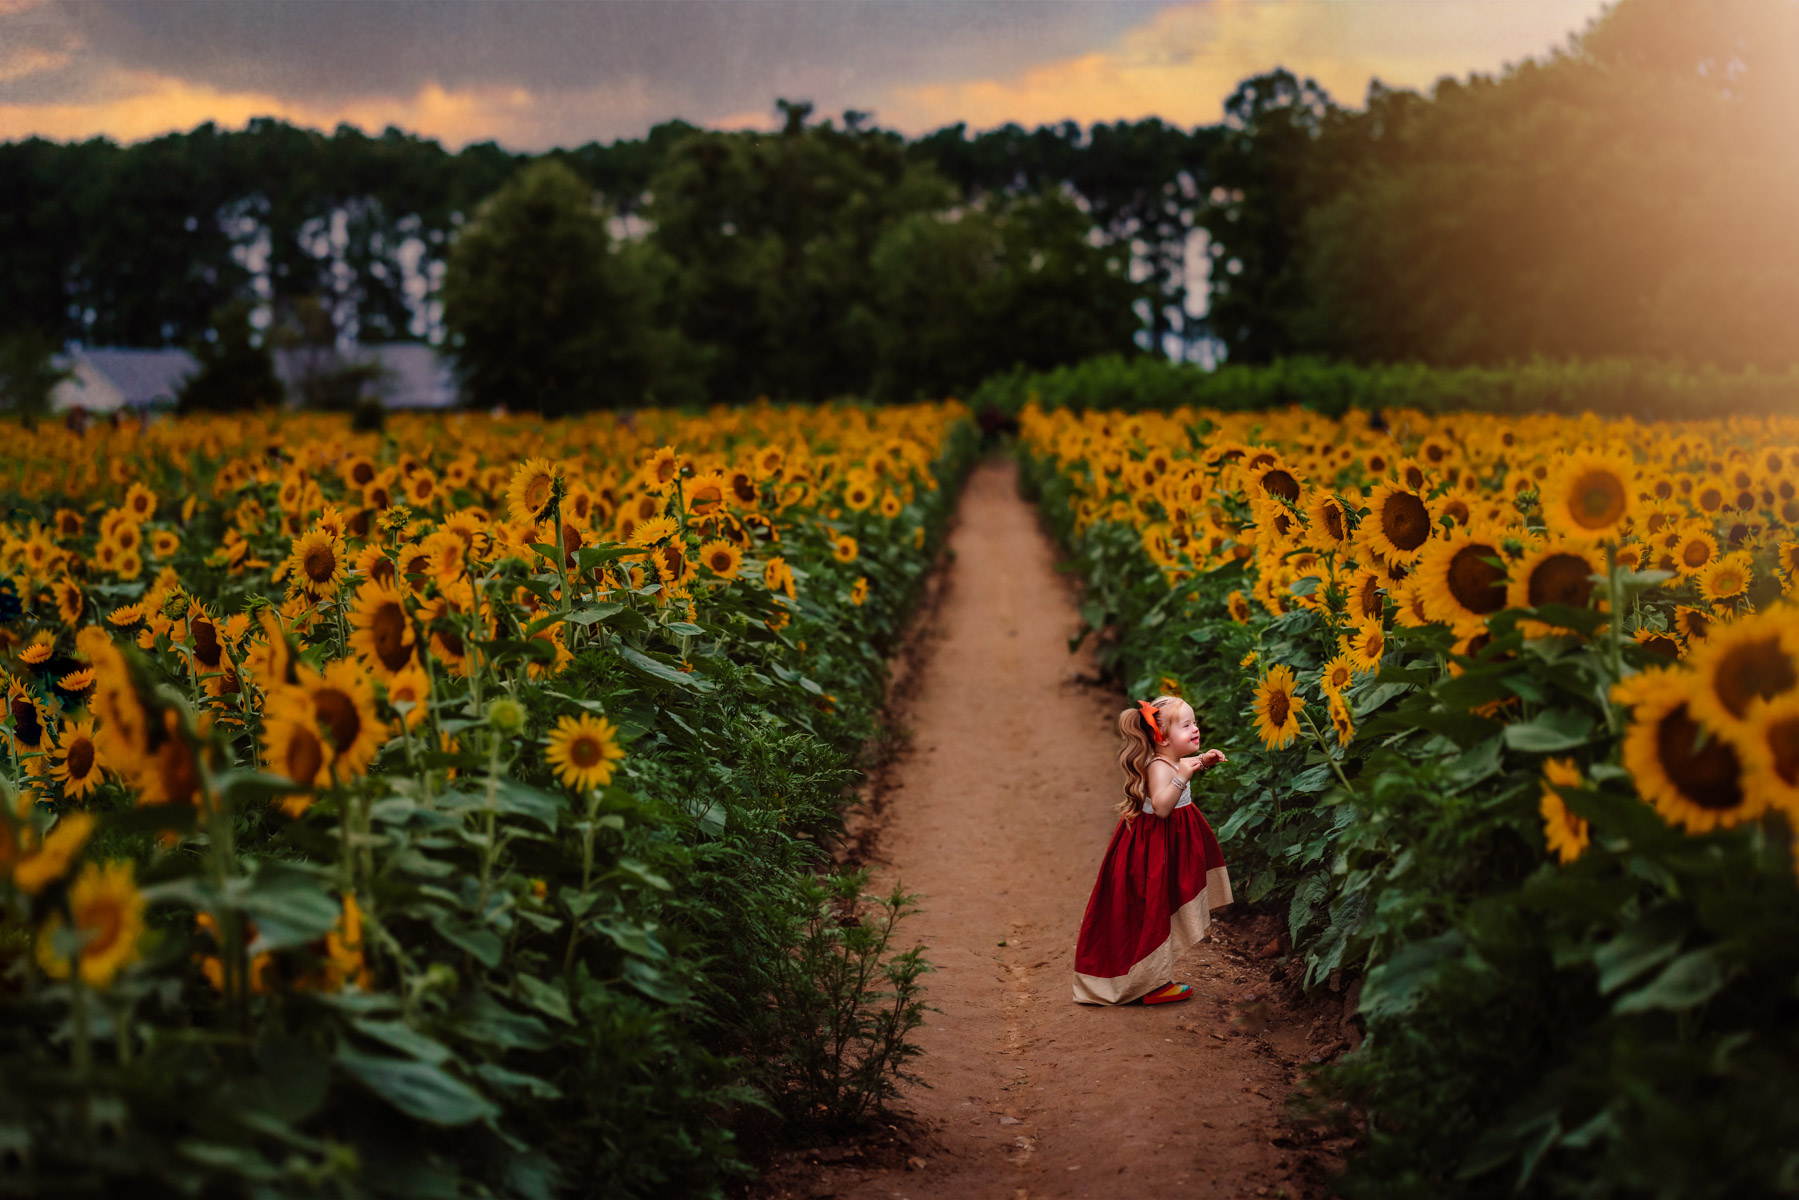 little girl in a field of sunflowers admiring the large flowers